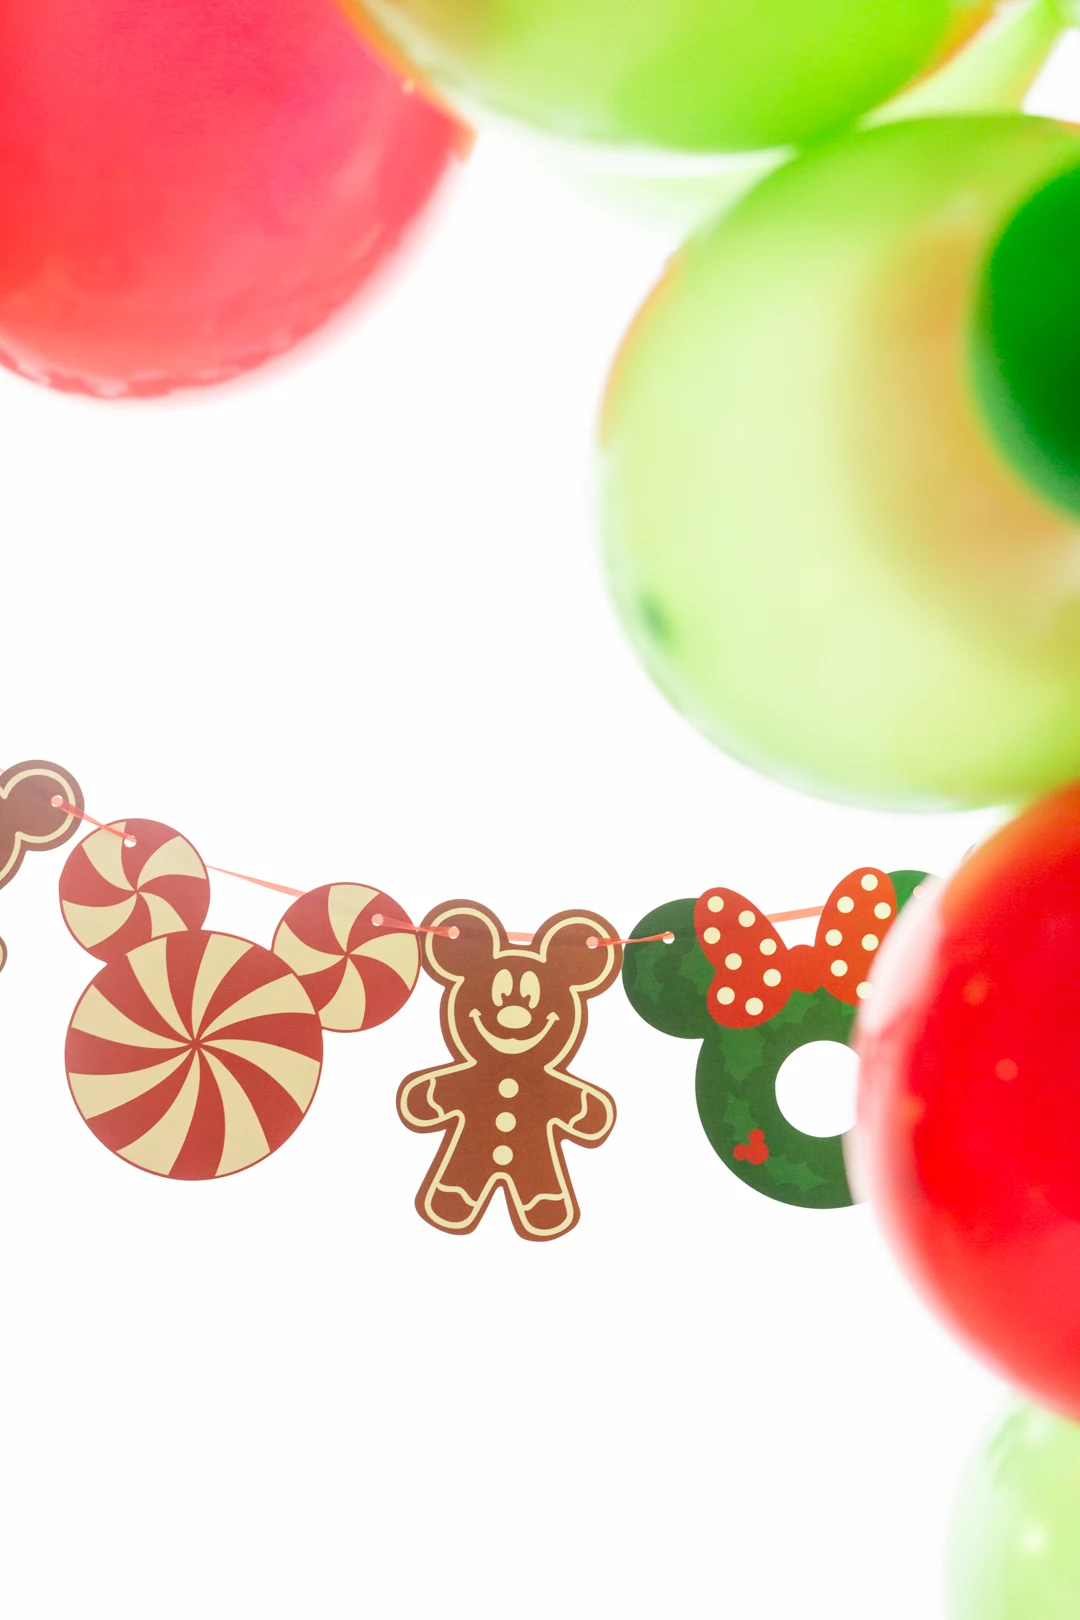 christmas themed mickey mouse party banner surrounded by red and green balloons. mickey mouse gingerbread man, mickey shaped peppermint, mickey shaped wreath decorations on the banner